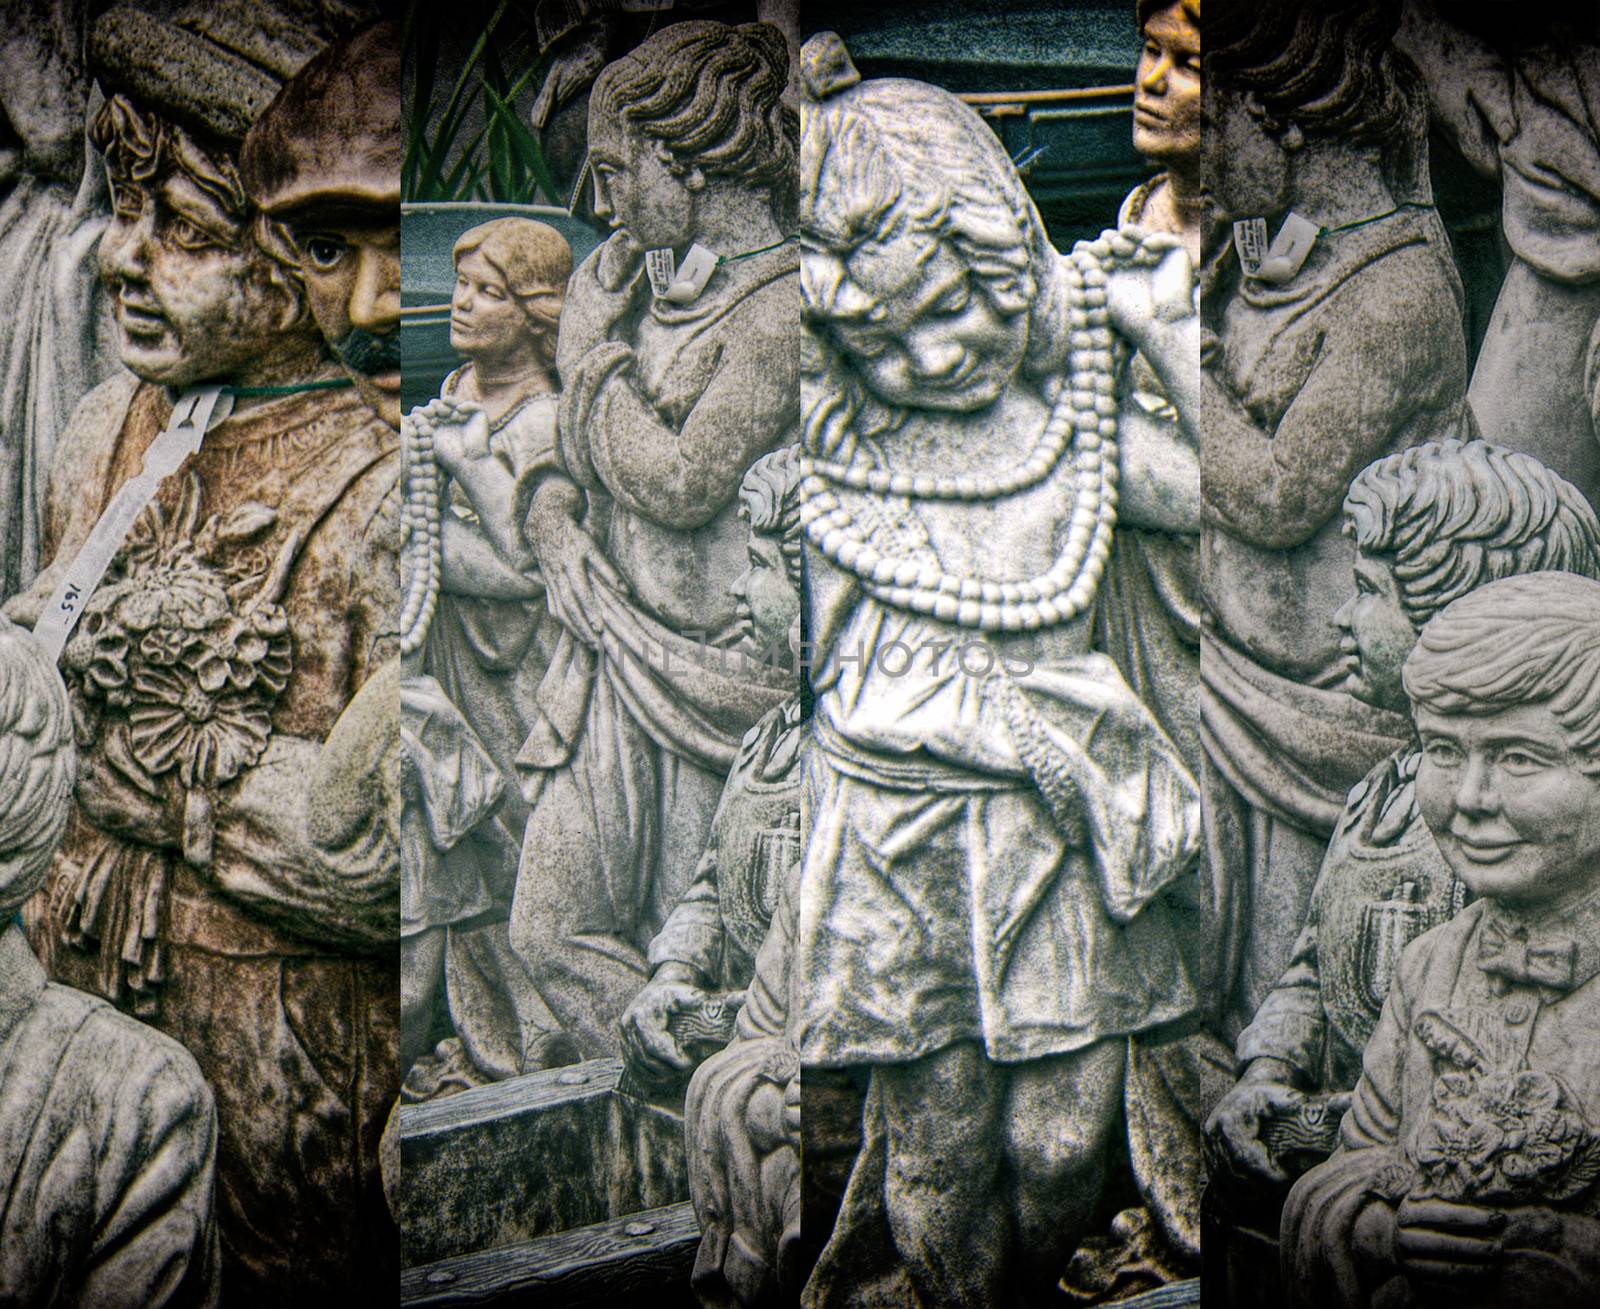 American old stone sculptures